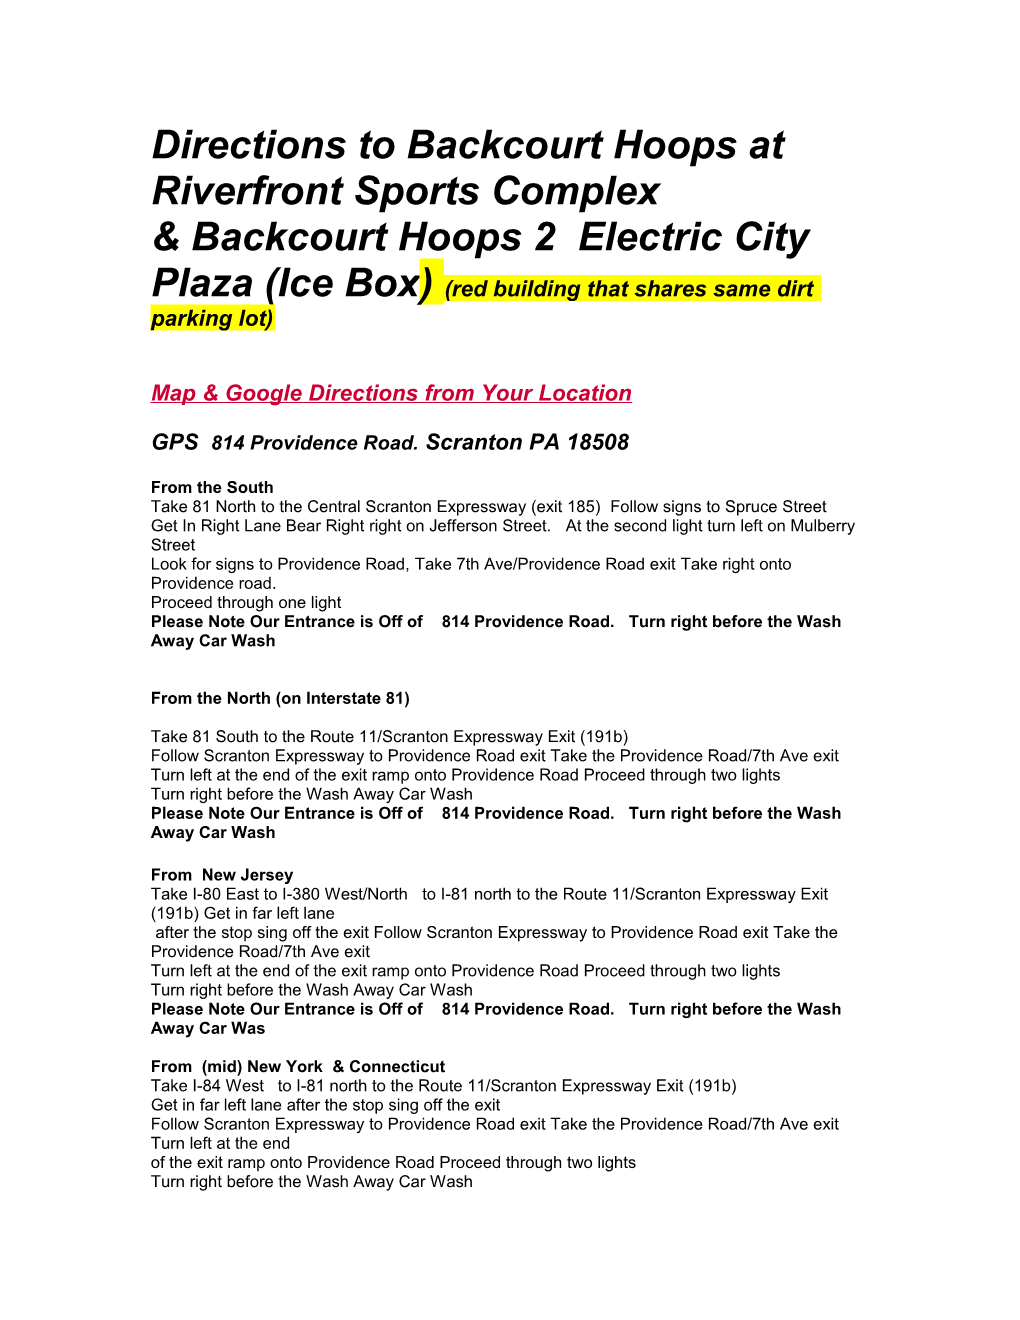 Directions to Backcourt Hoops at Riverfront Sports Complex